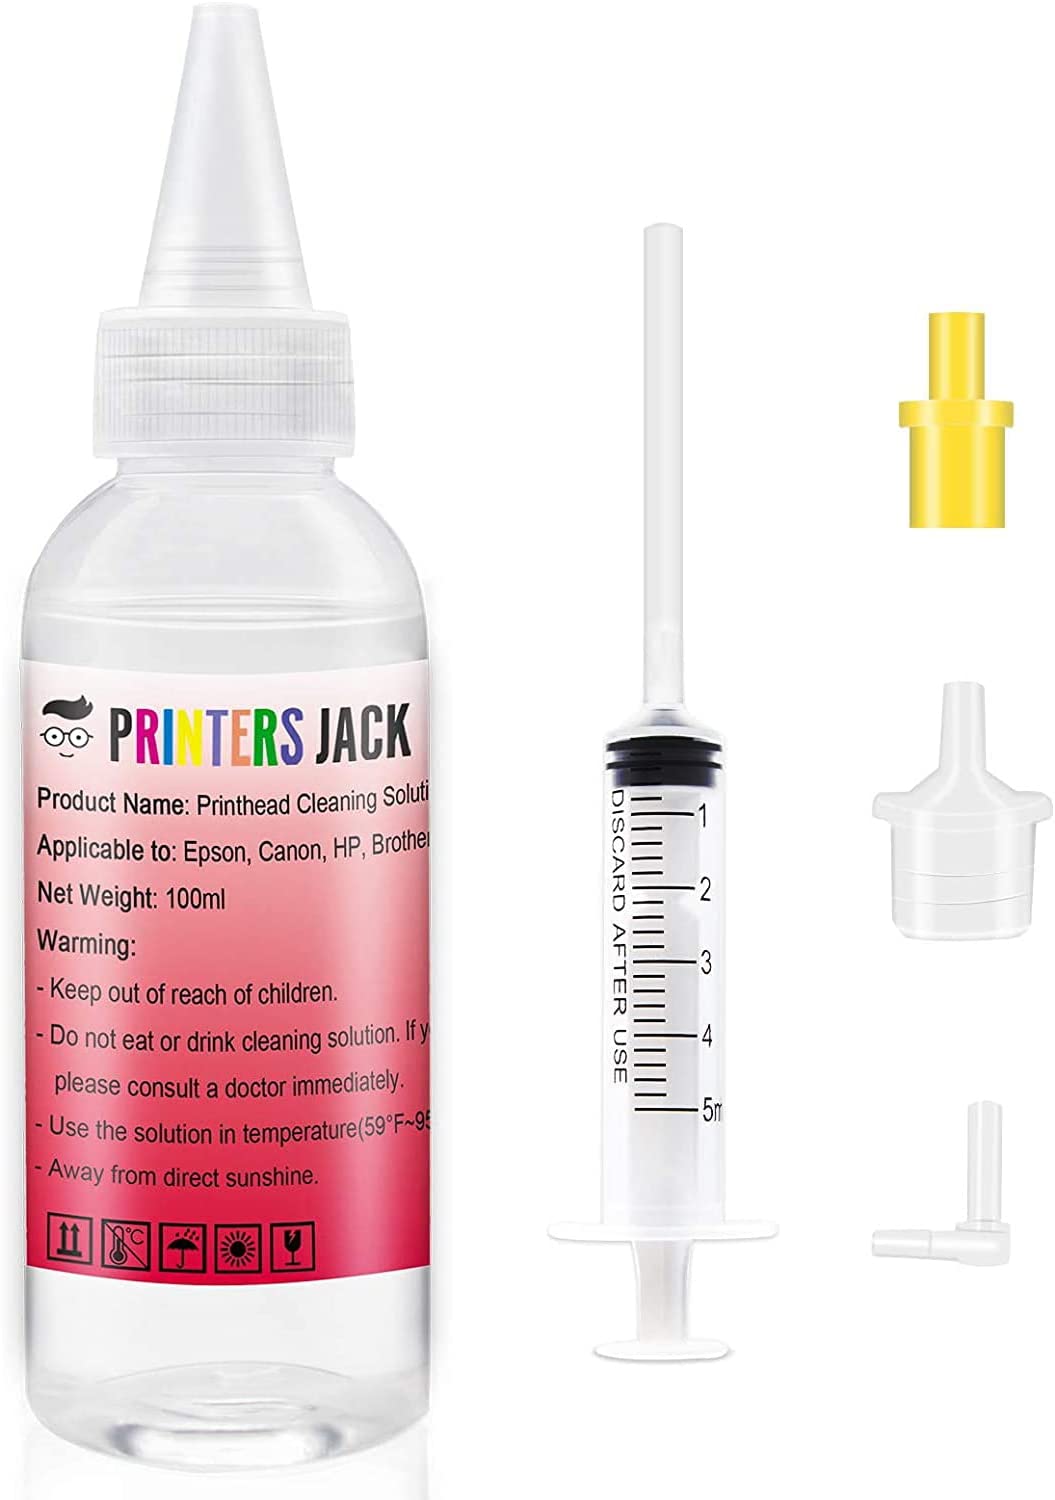 Printers Jack Printhead Cleaning Kit Nozzle Solution for Brother HP Officejet 8610 8600 8620 6600 5520 6500 6700 Canon Pro 10 Pro 100 MX922 Brother MG7120 MG6320 Inkjet Printers